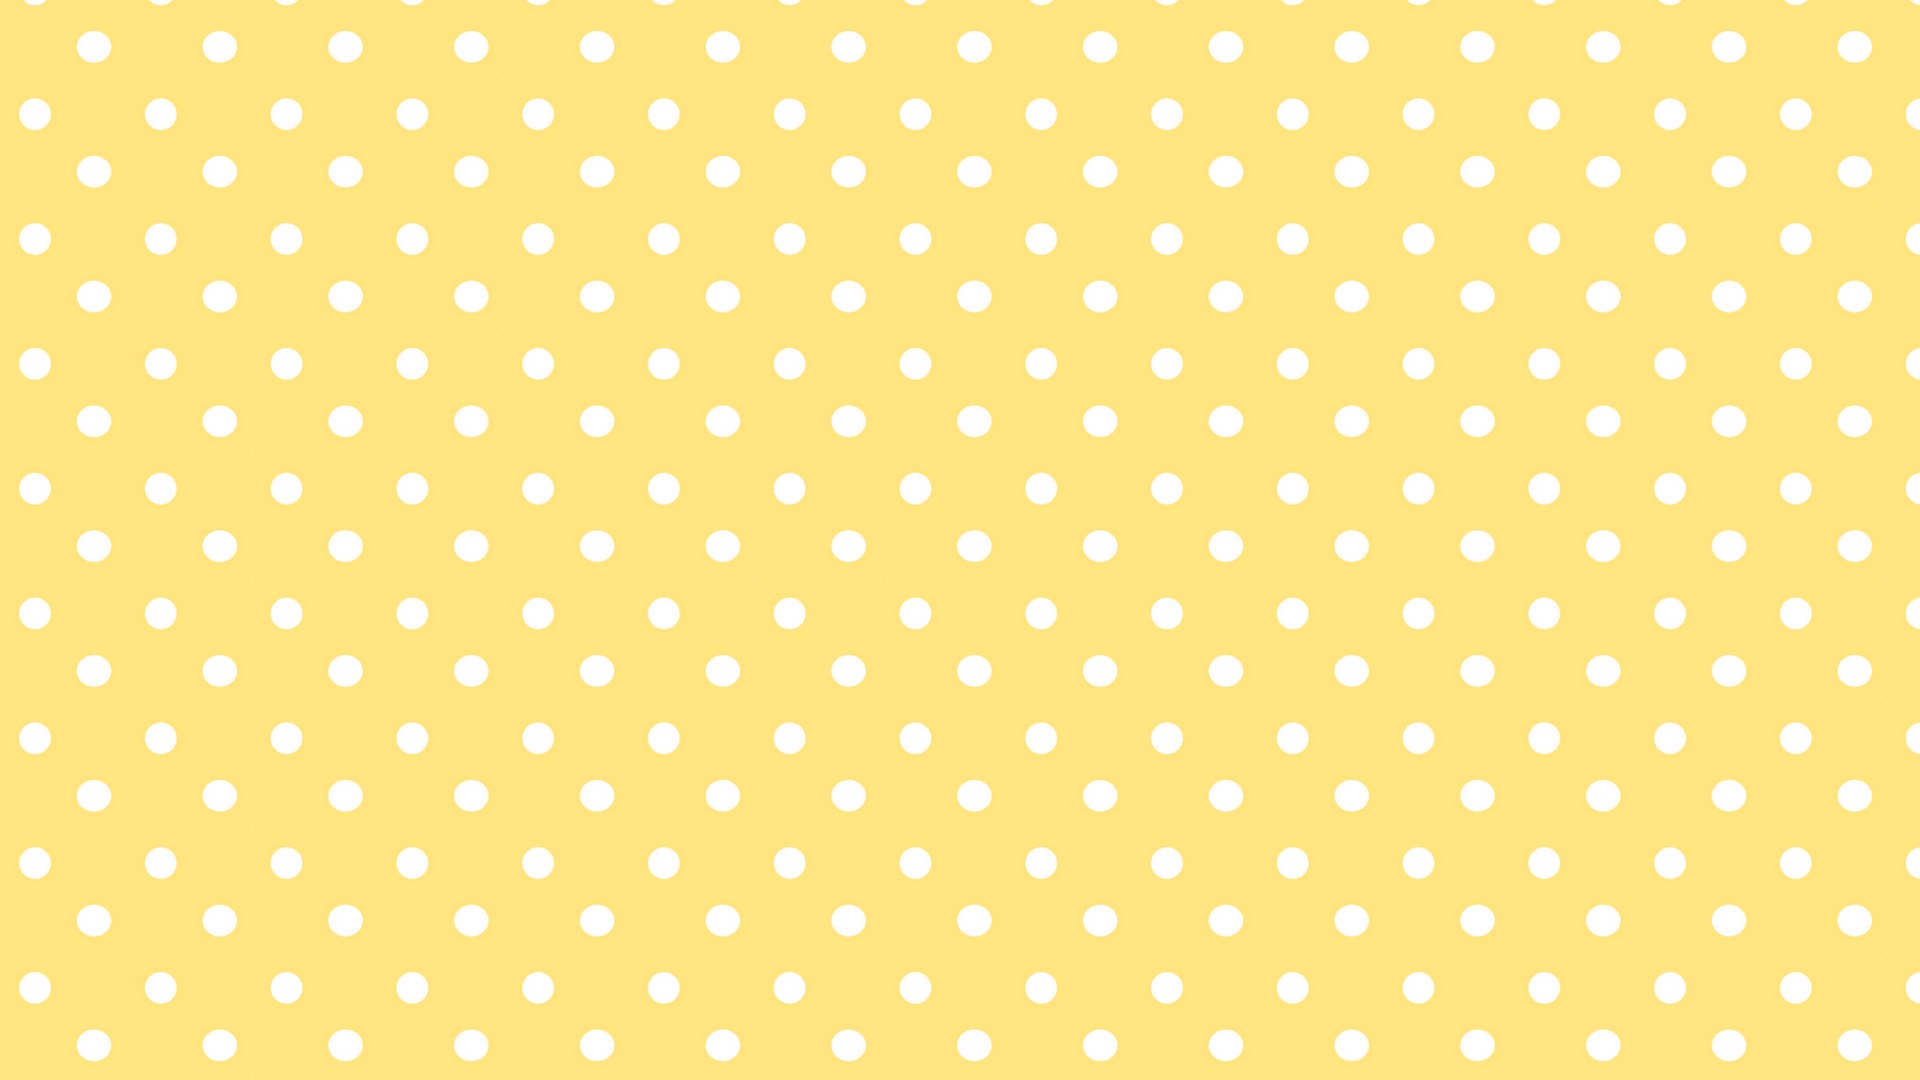 Wallpaper Yellow Theme Desktop with resolution 1920X1080 pixel. You can use this wallpaper as background for your desktop Computer Screensavers, Android or iPhone smartphones